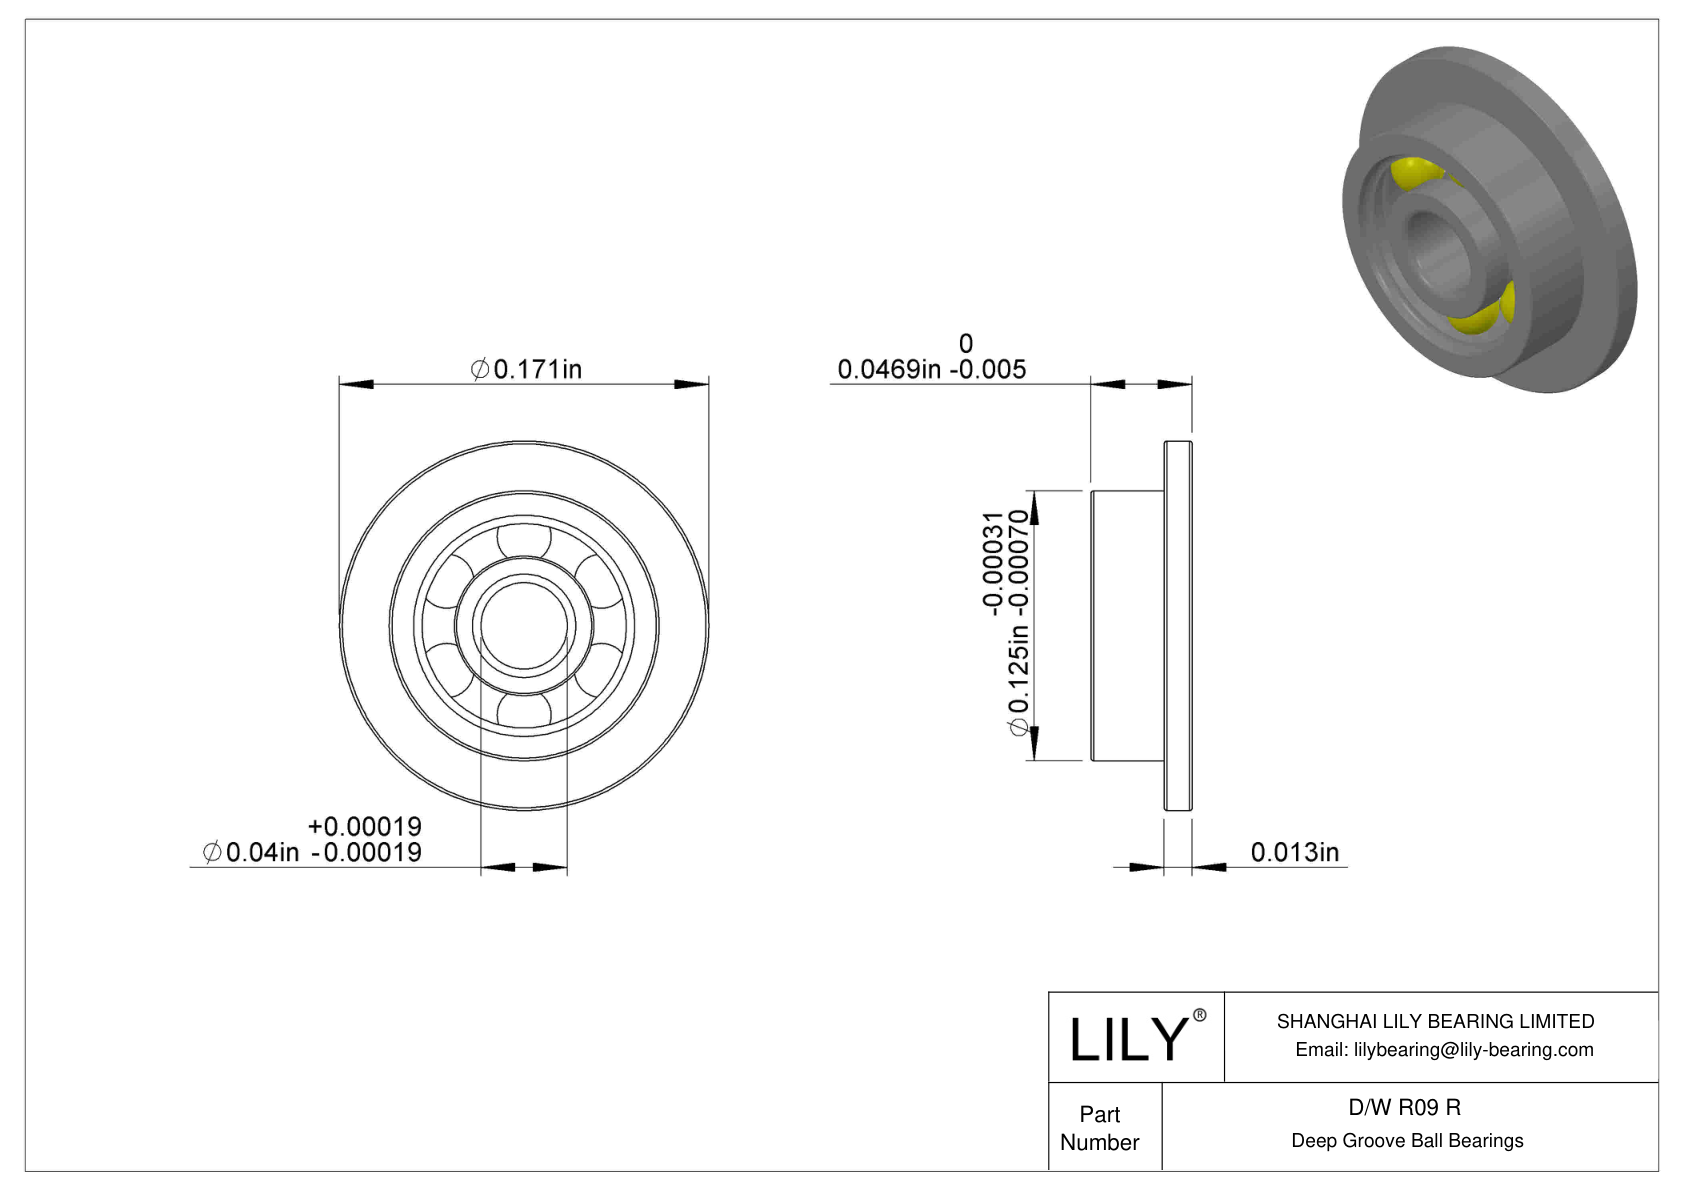 D/W R09 R Flanged Ball Bearings cad drawing